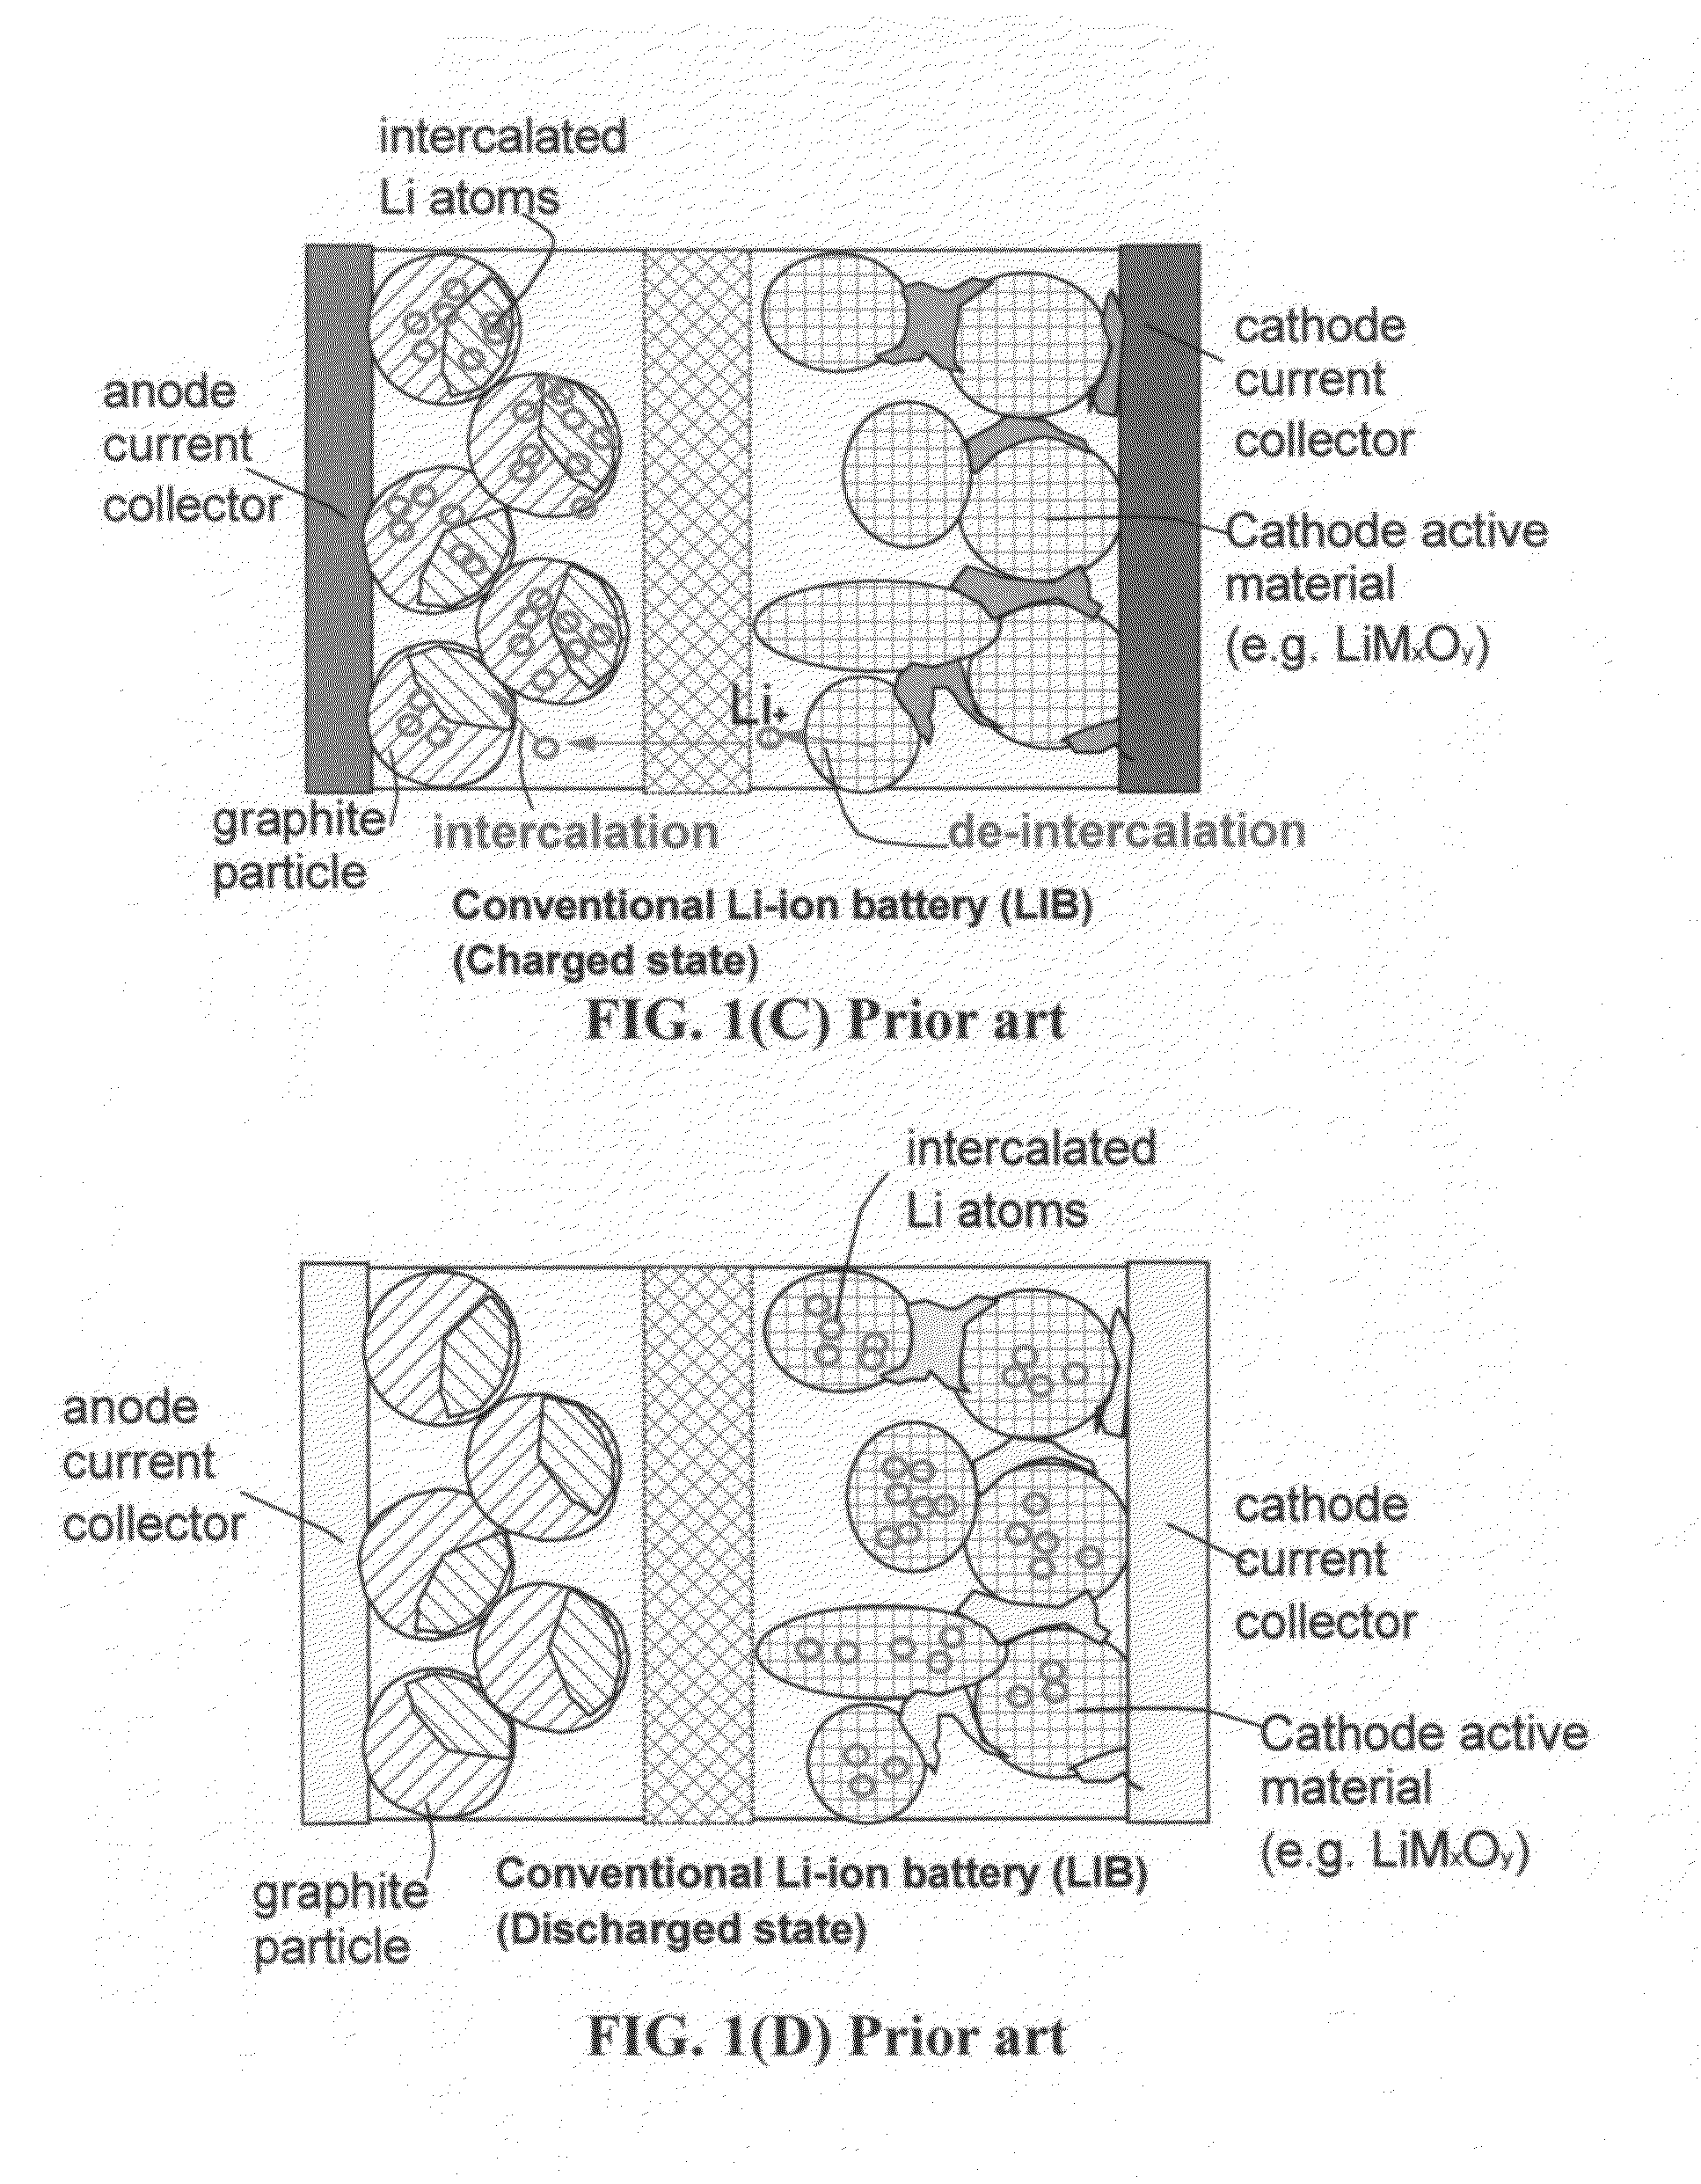 Lithium-ion cell having a high energy density and high power density